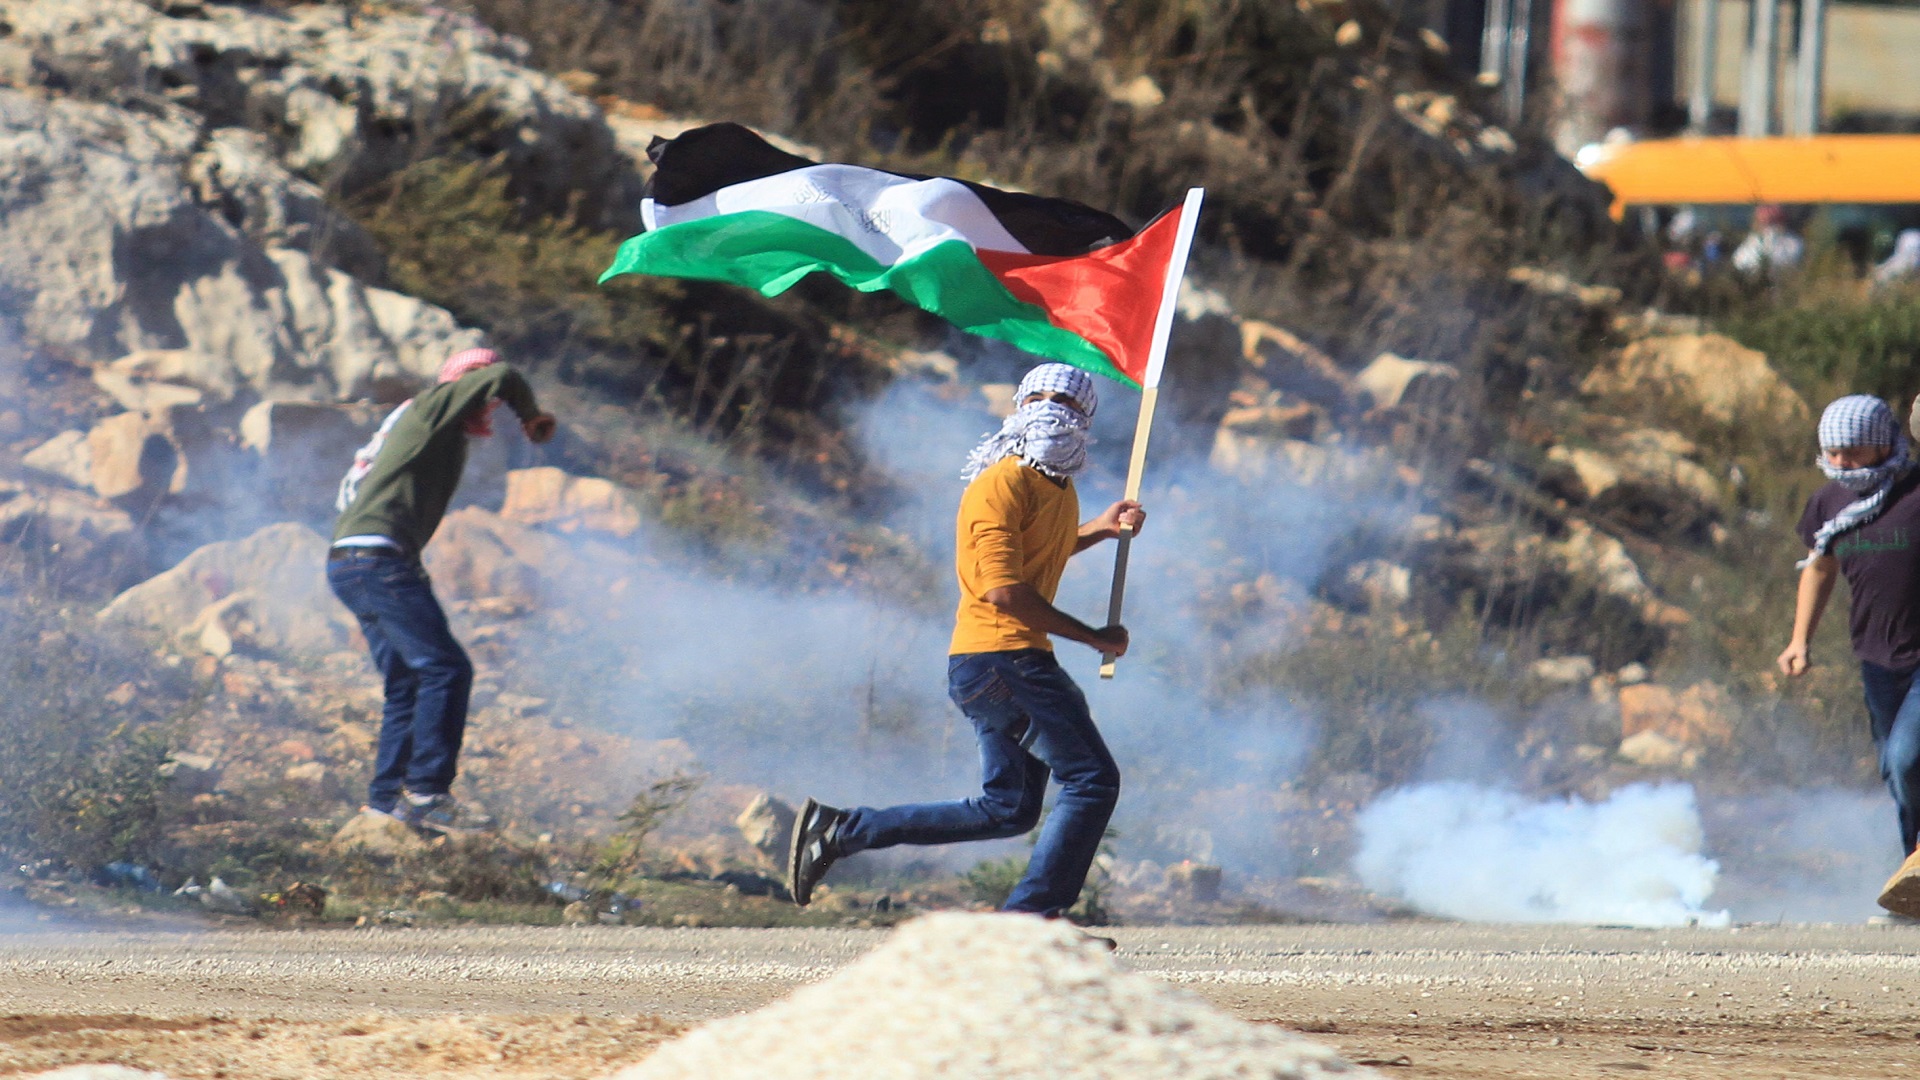 Clashes between Israeli security forces and Palestinians